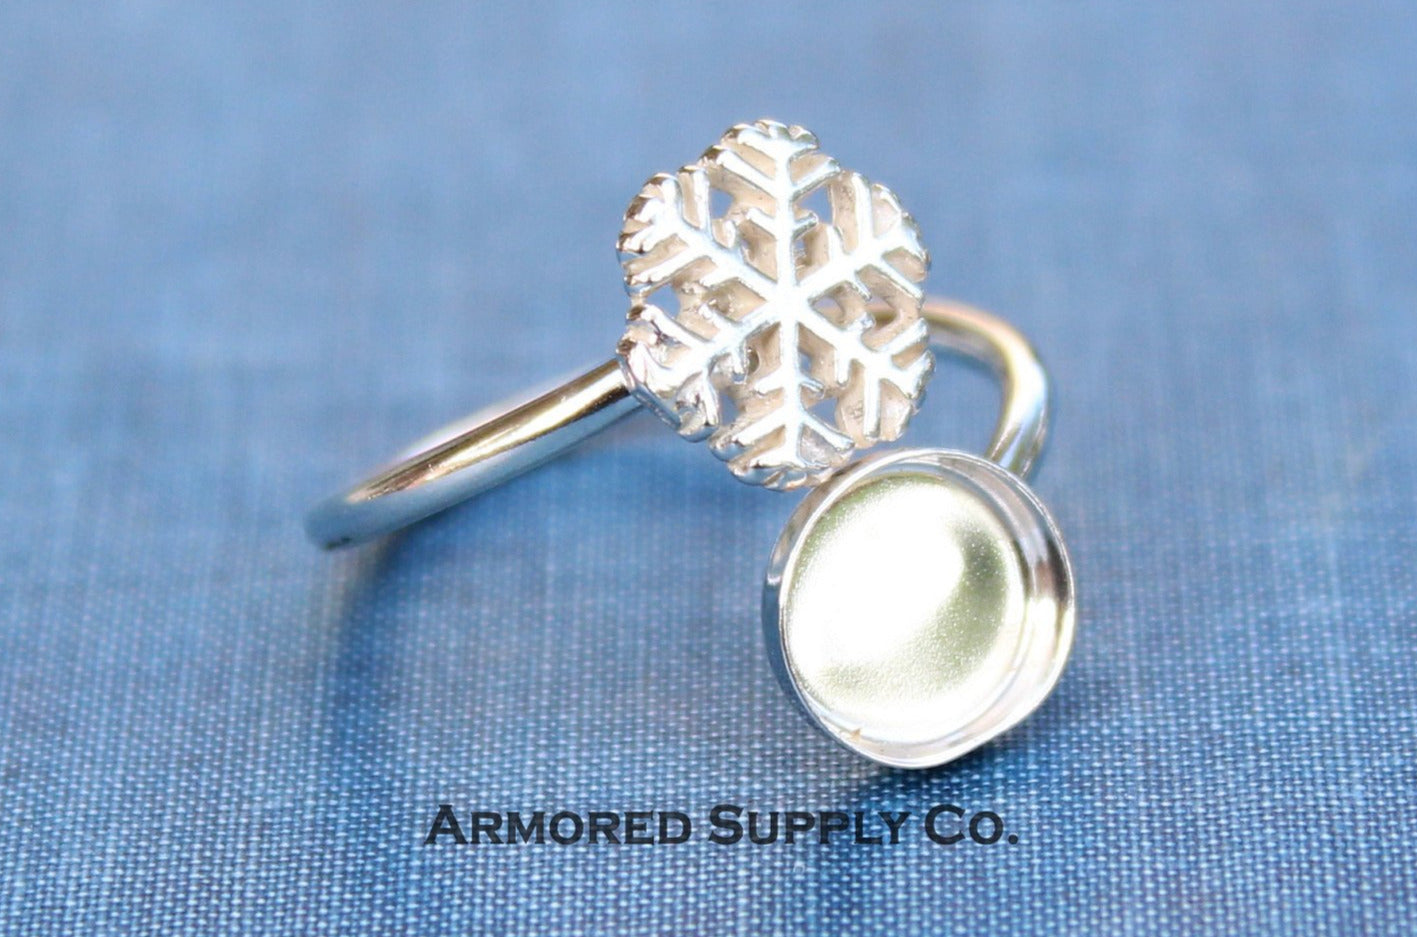 Sterling Silver Snowflake Wrap Adjustable Bezel Cup Ring blank, Round Cabochon, Breast Milk DIY ring, jewelry supplies, wholesale jewelry